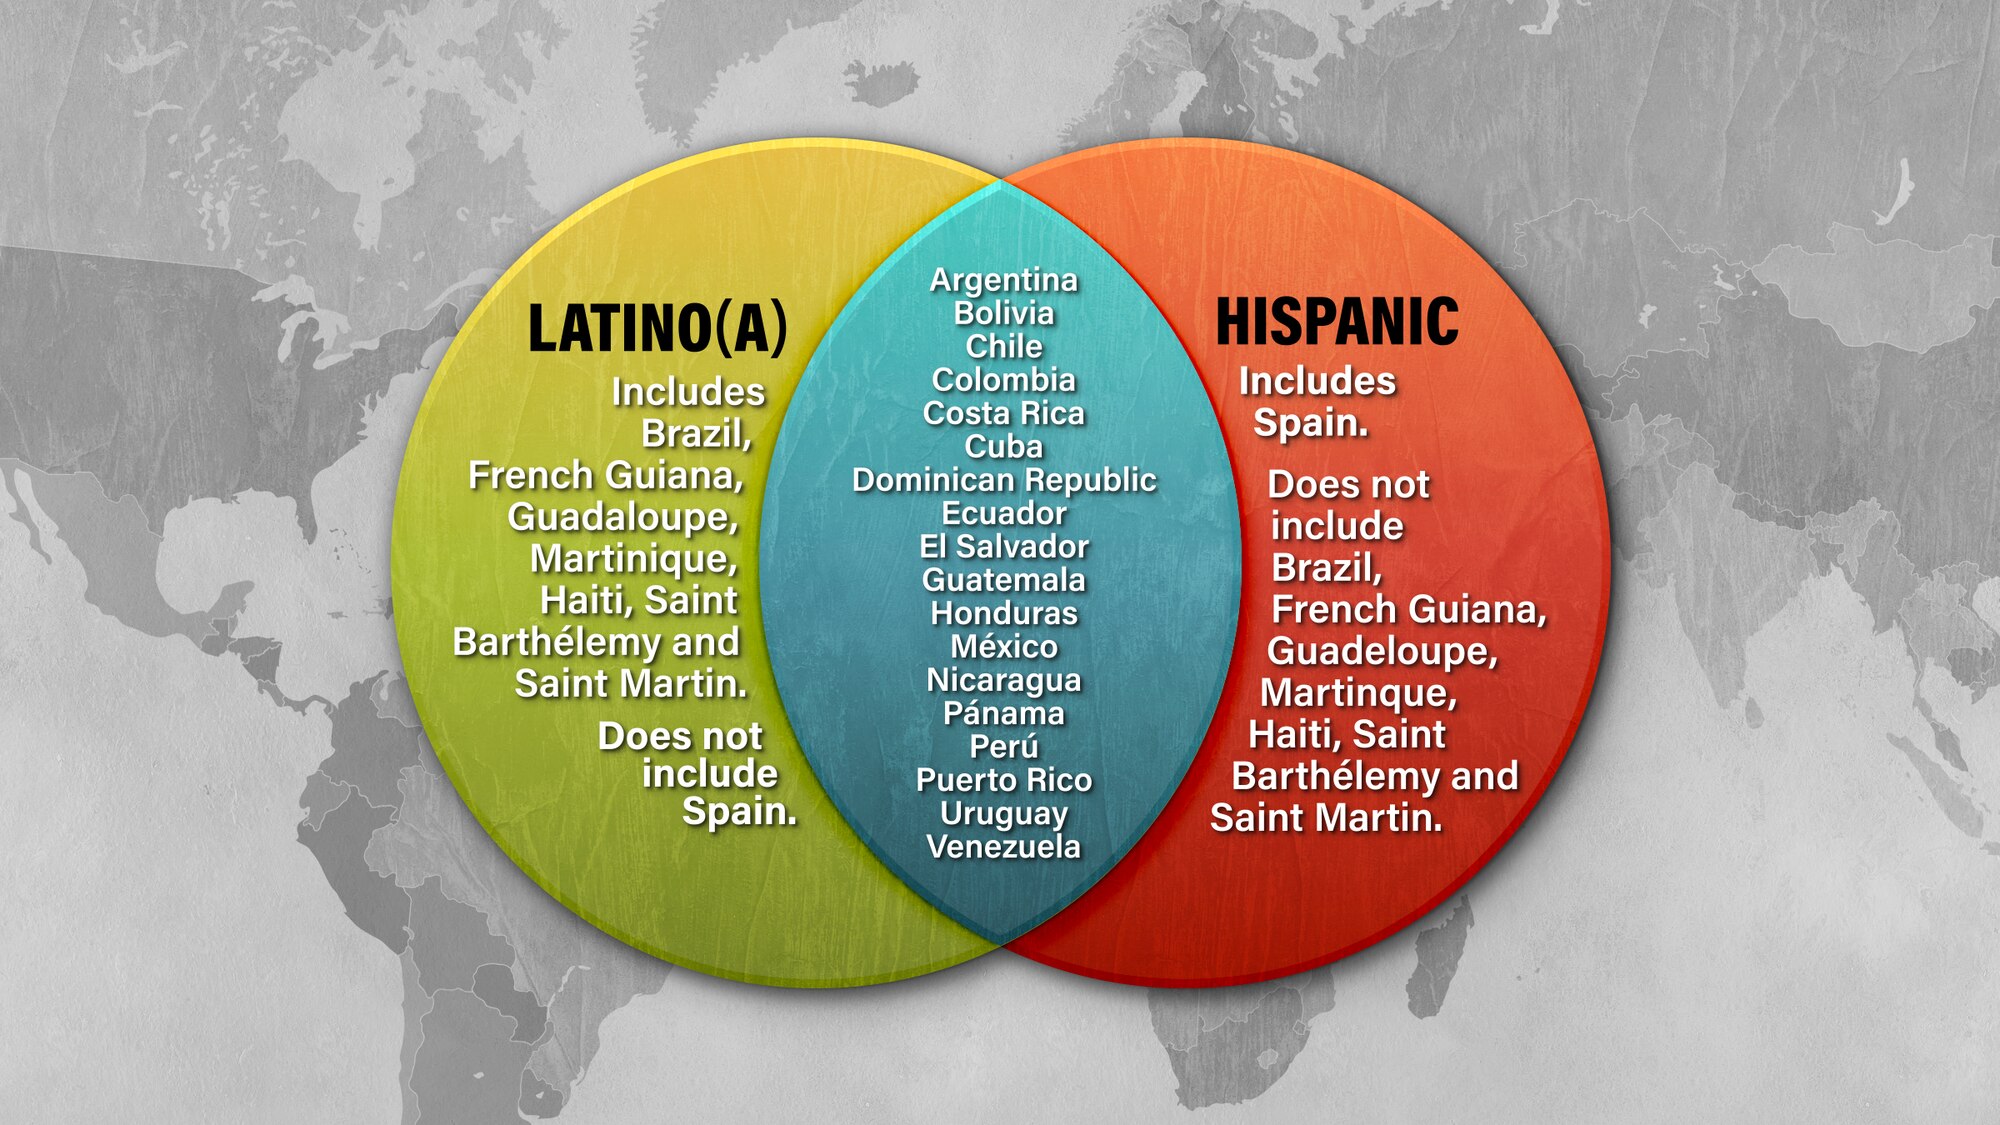 A Venn diagram showing the relationship between the terms Hispanic and Latino.